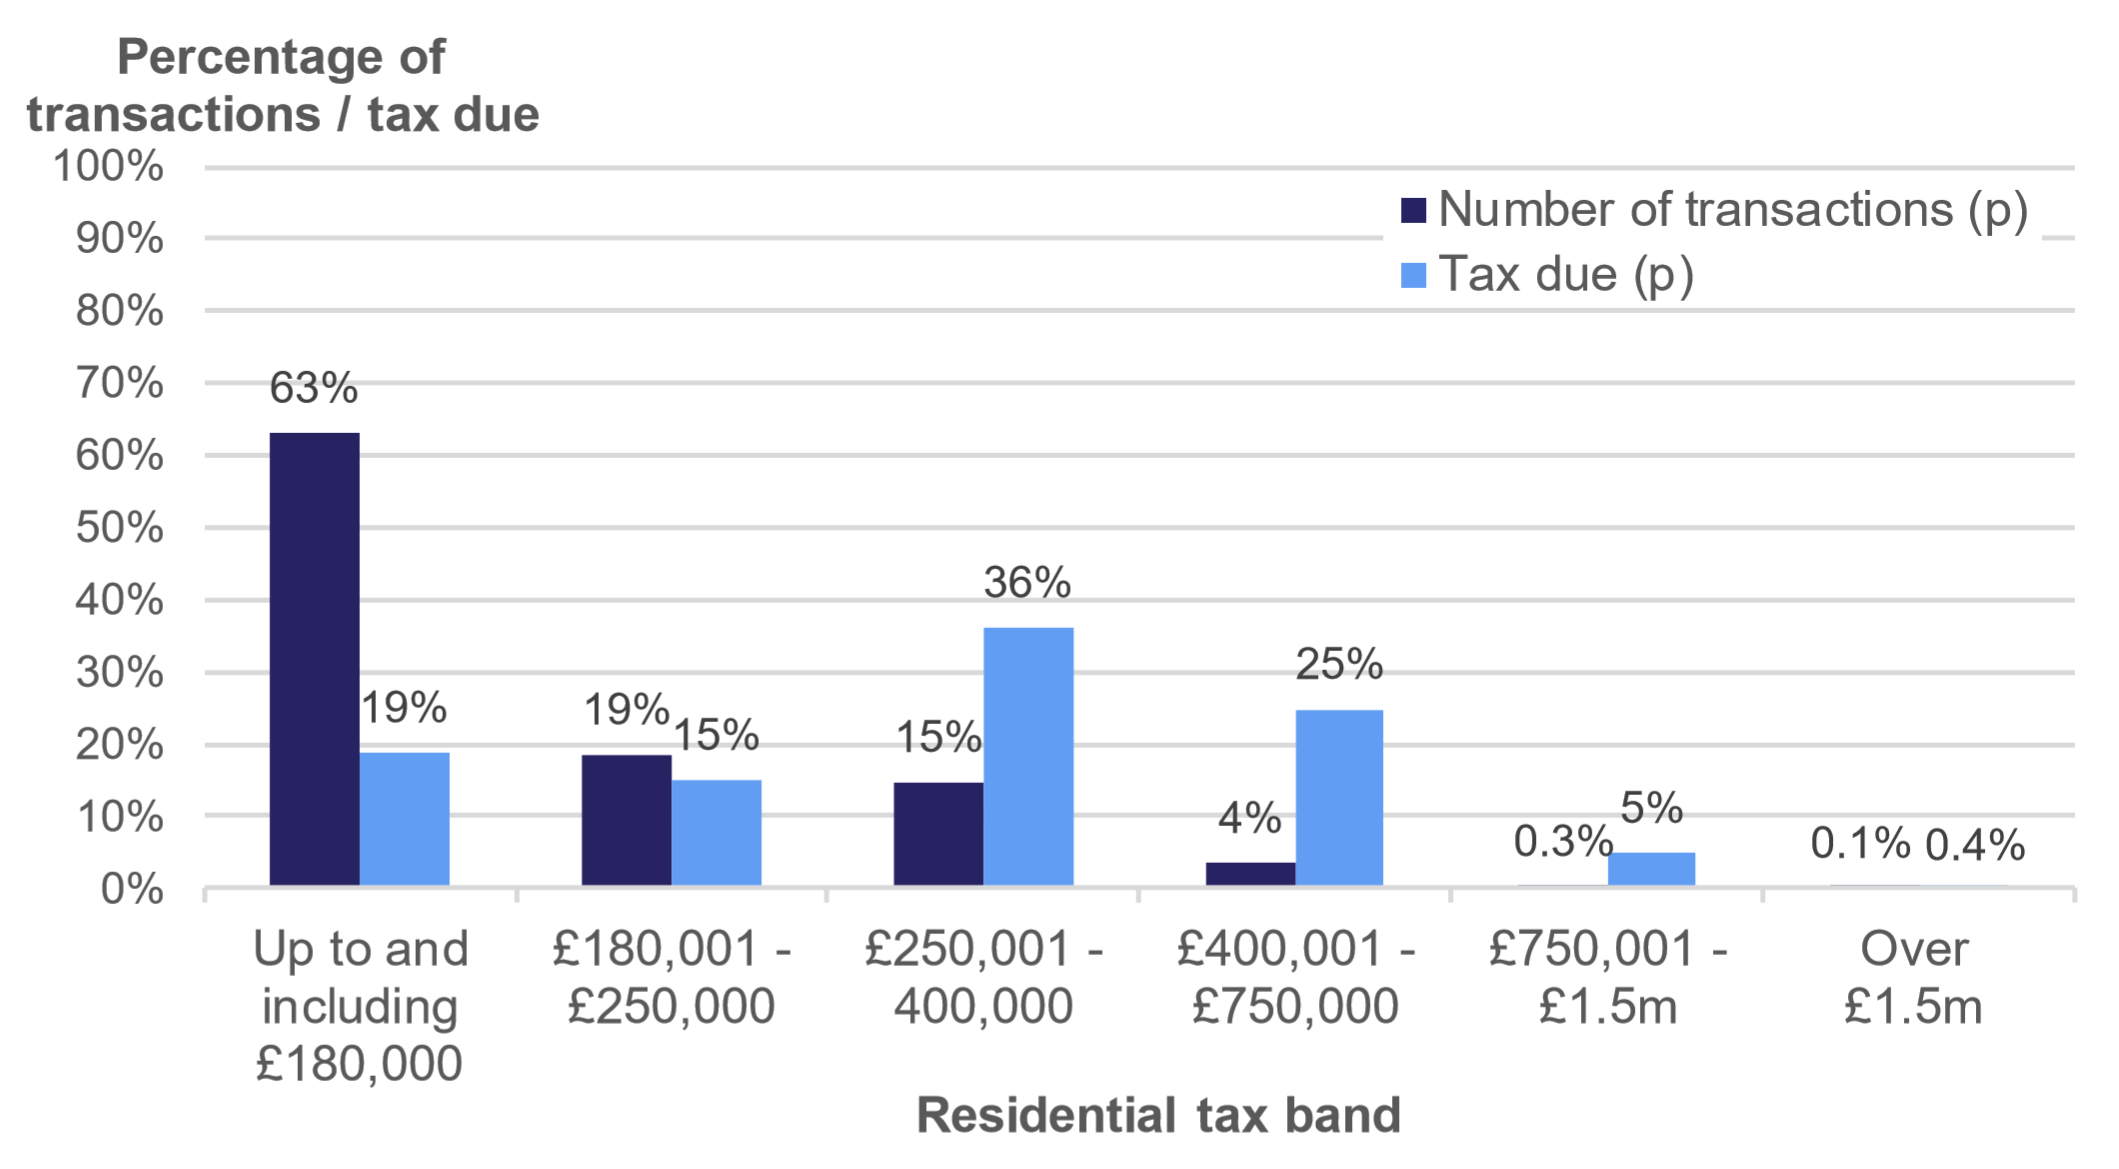 Figure 3.3 shows the number of residential transactions and amount of tax due, by residential tax band. Data is presented as the percentage of transactions or tax due and relates to transactions effective in April to June 2019.